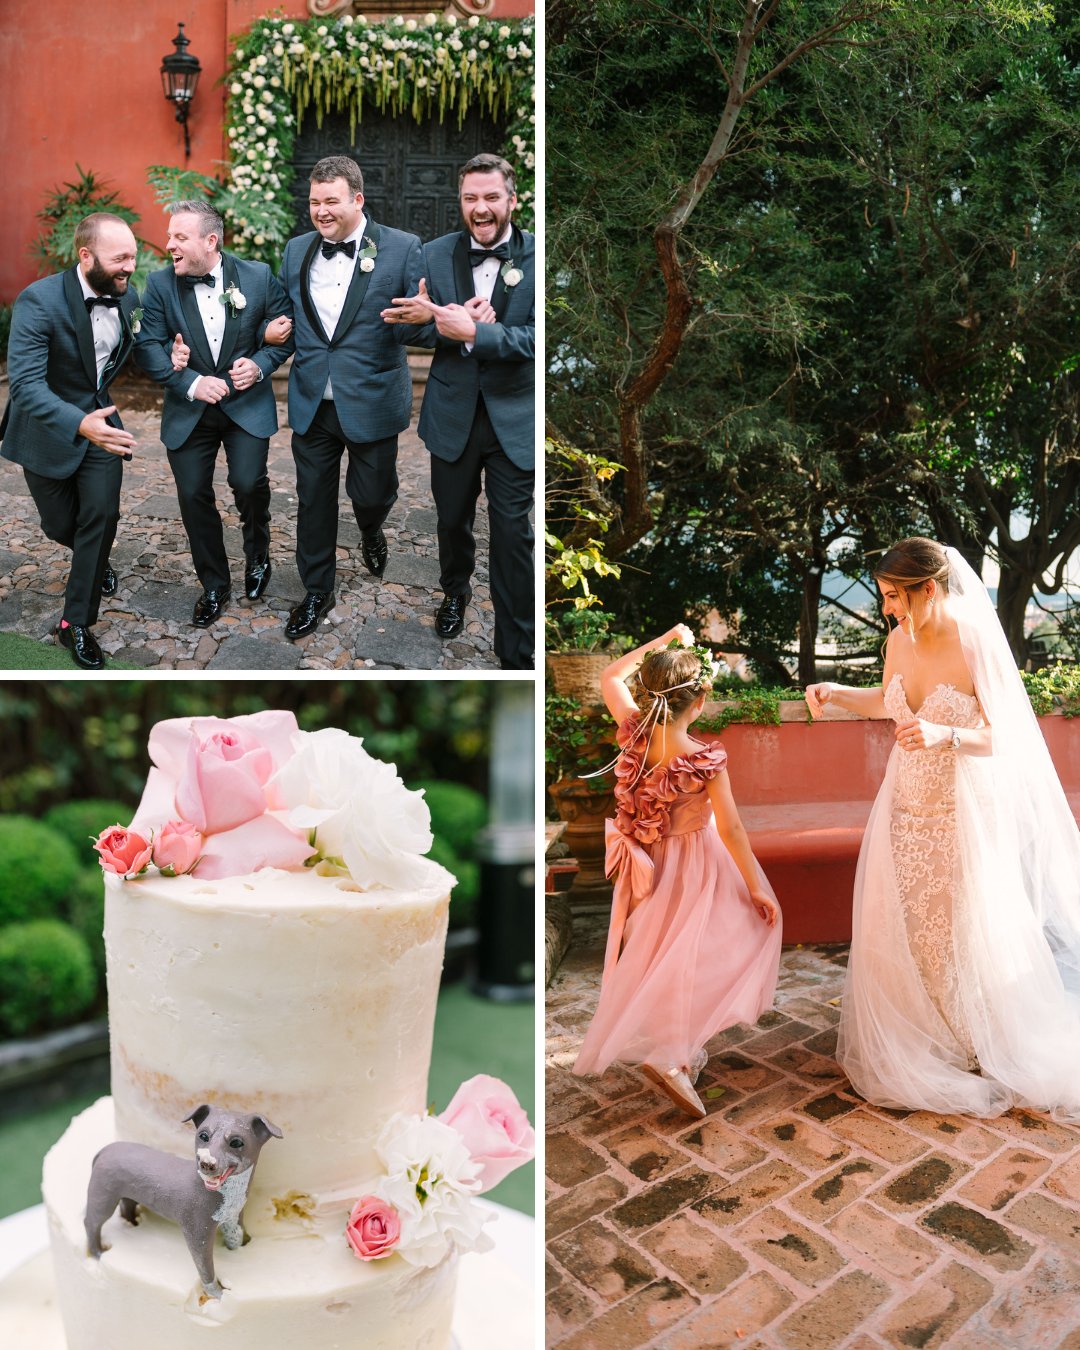 groomsmen laughing together, cake with a figurine of couple's dog, Katie with flower girl